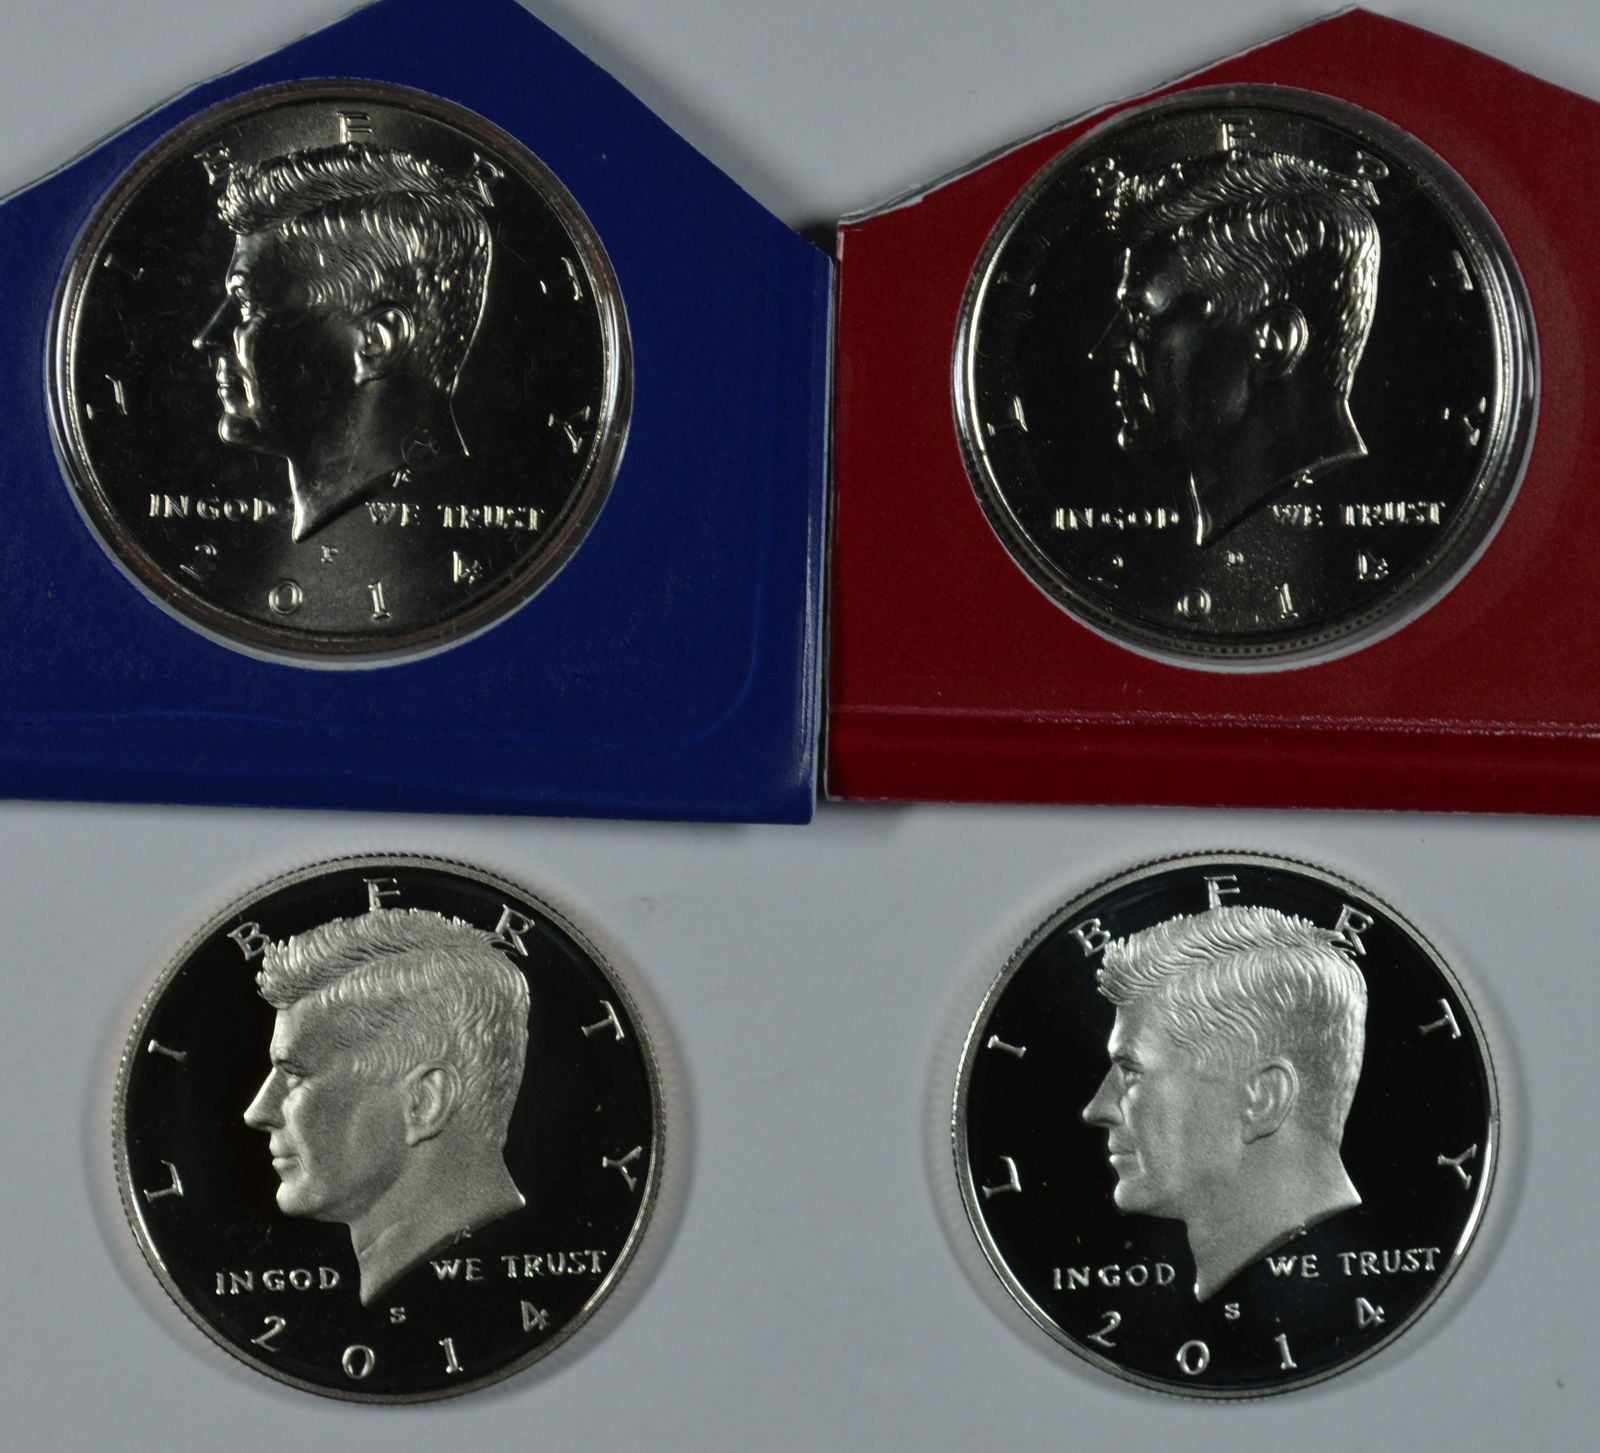 2014 P D S S Kennedy Uncirculated & Proof Half Dollars - $41.00